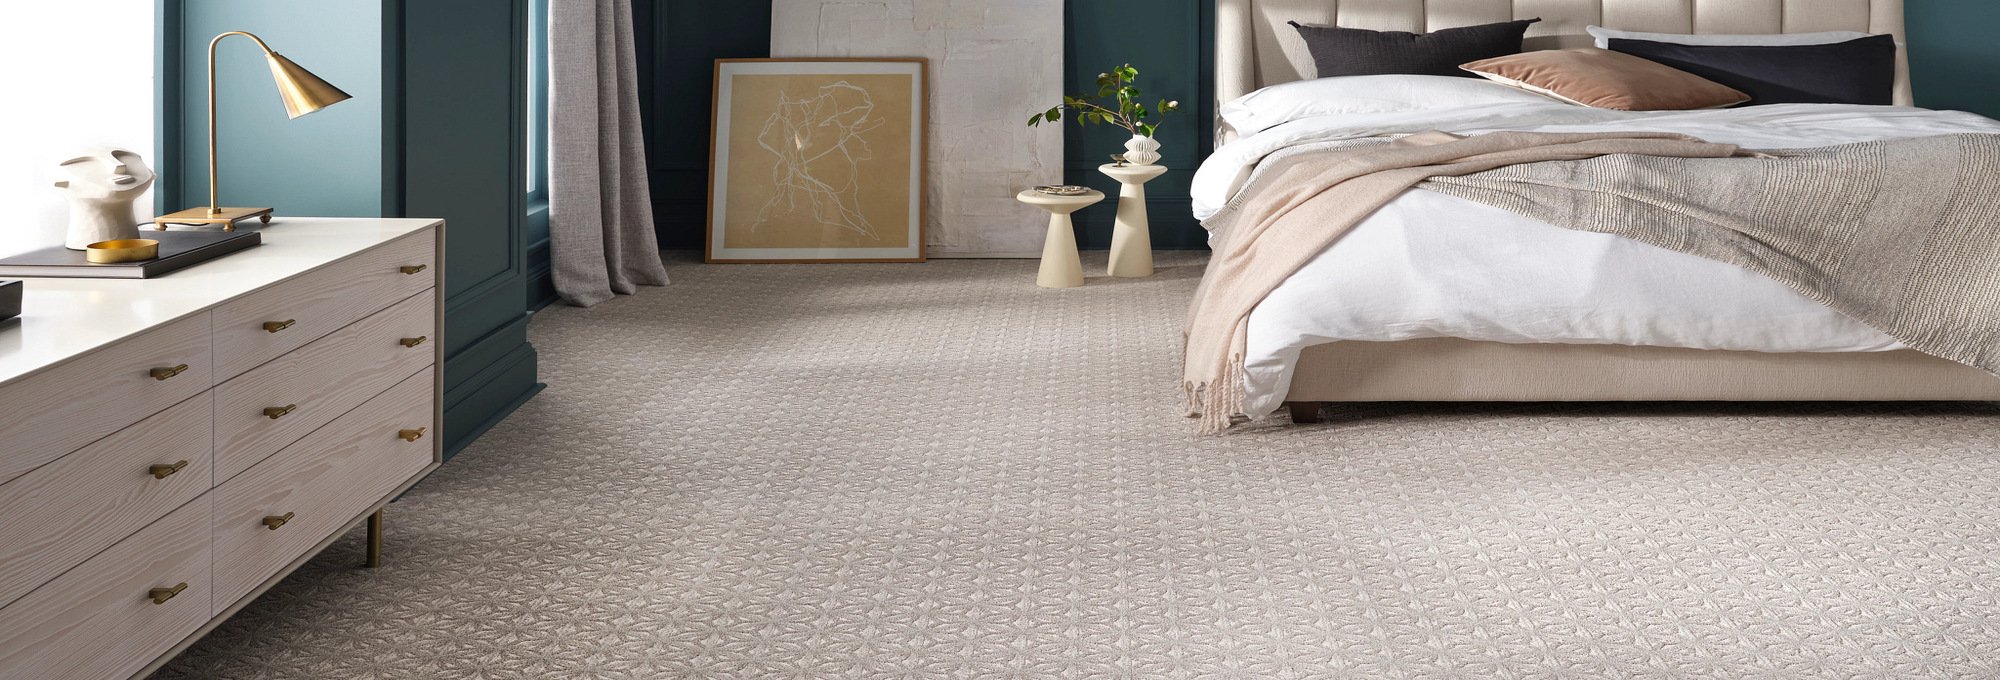 Bed on carpet from Milford Floor Covering in Milford